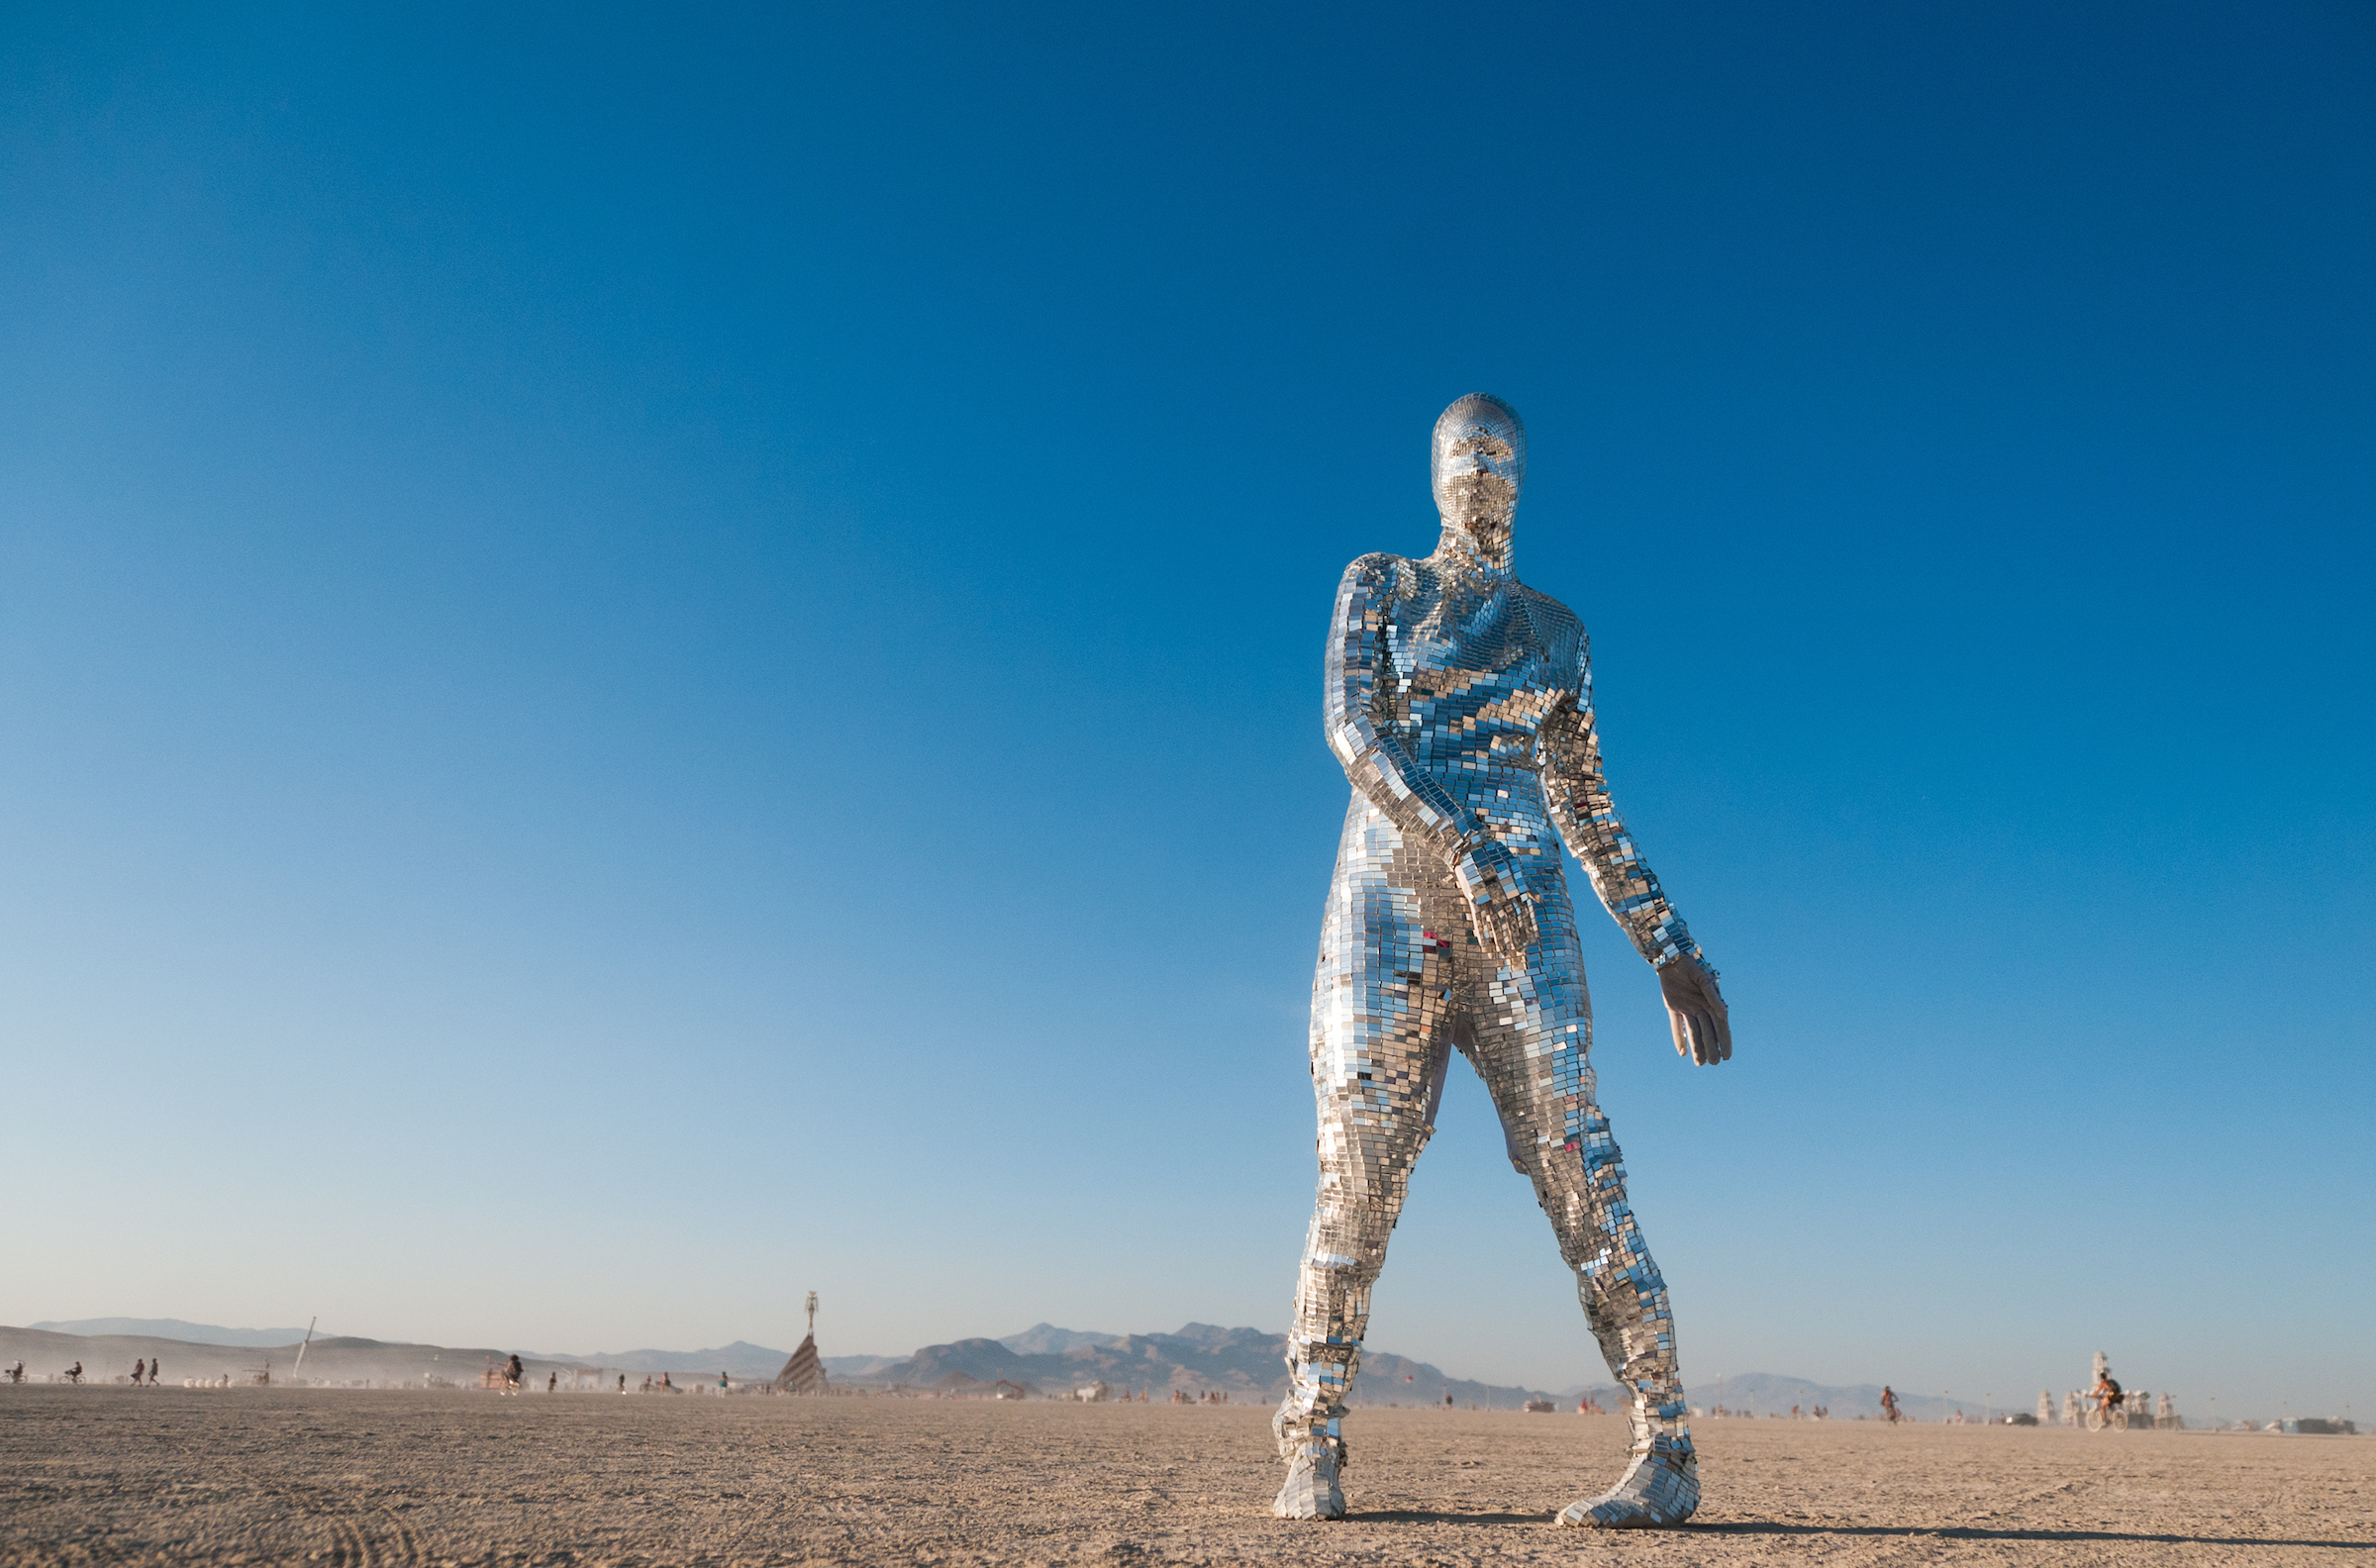 A person in a mirrored suit at Burning Man.